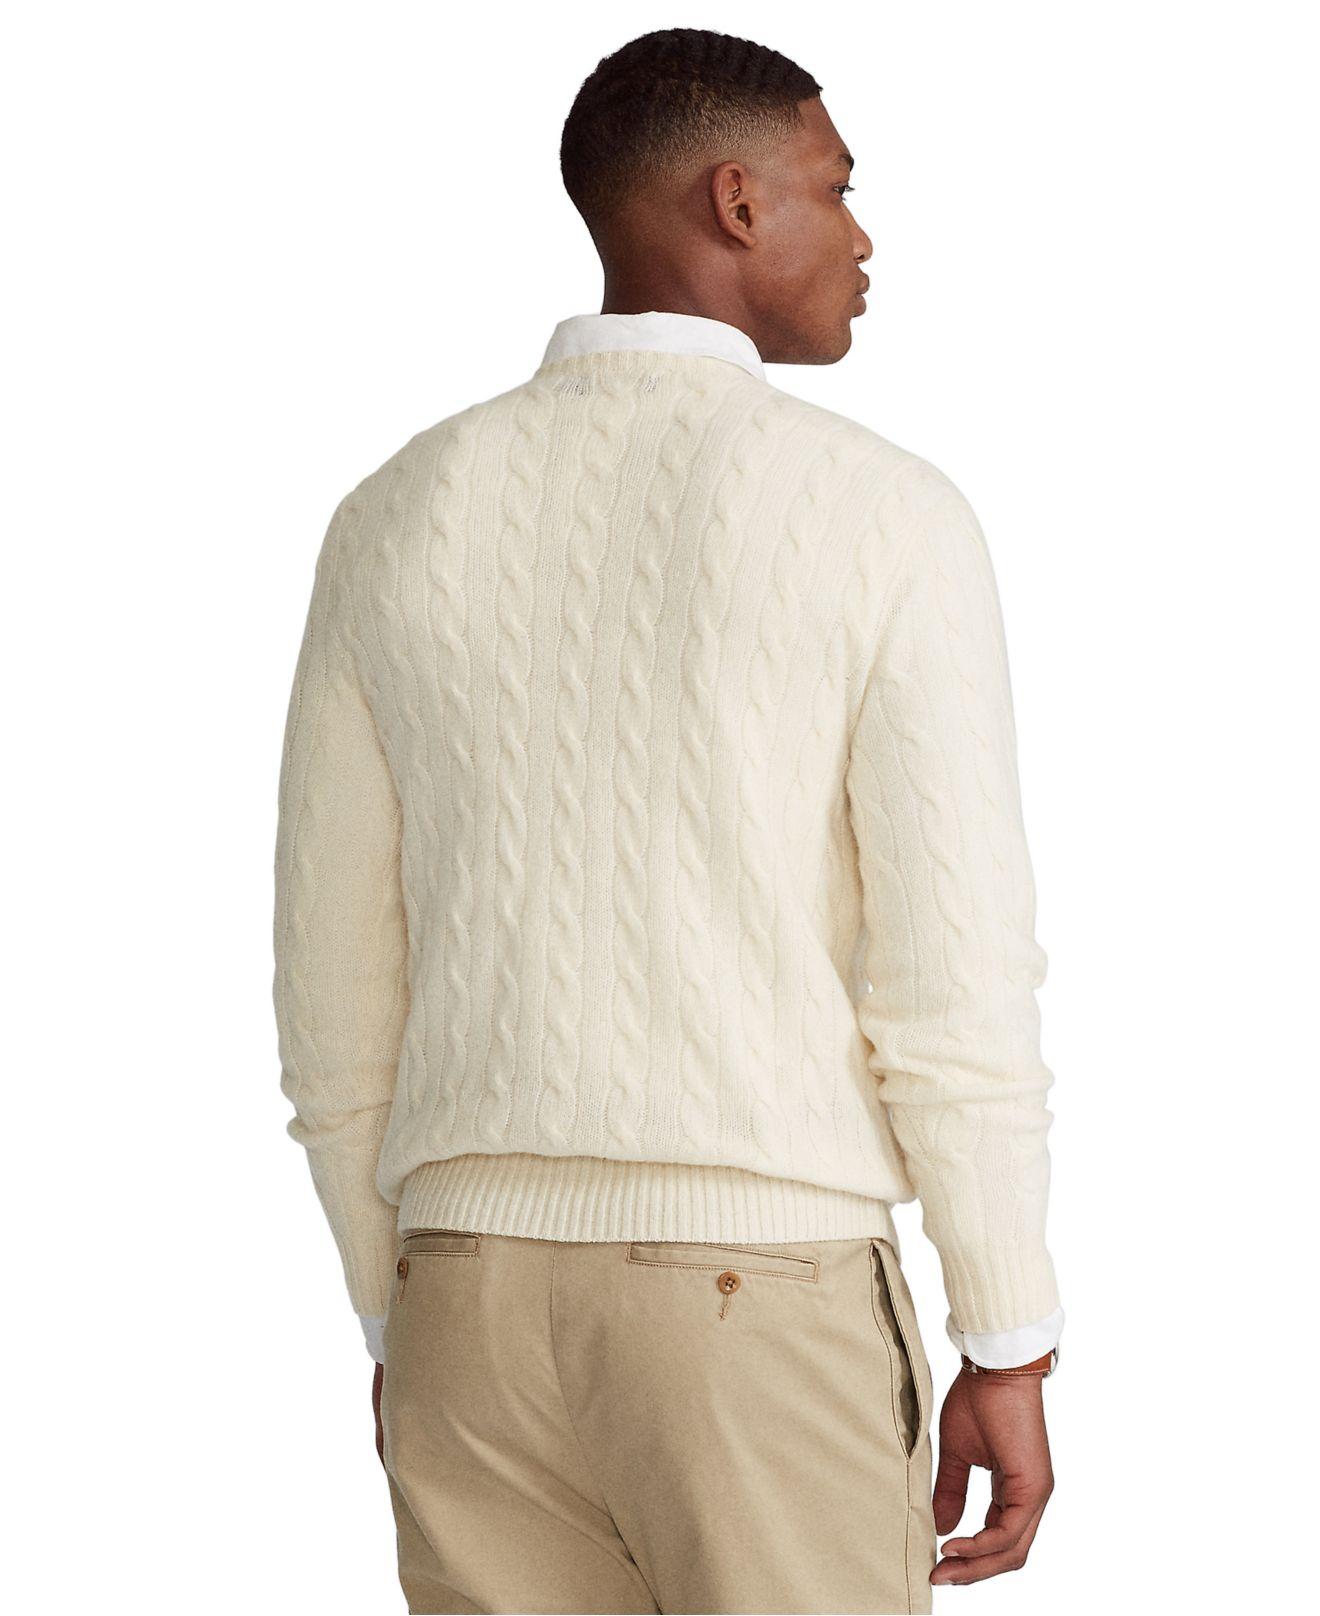 Polo Ralph Lauren Cable Wool-cashmere Sweater in Natural for Men